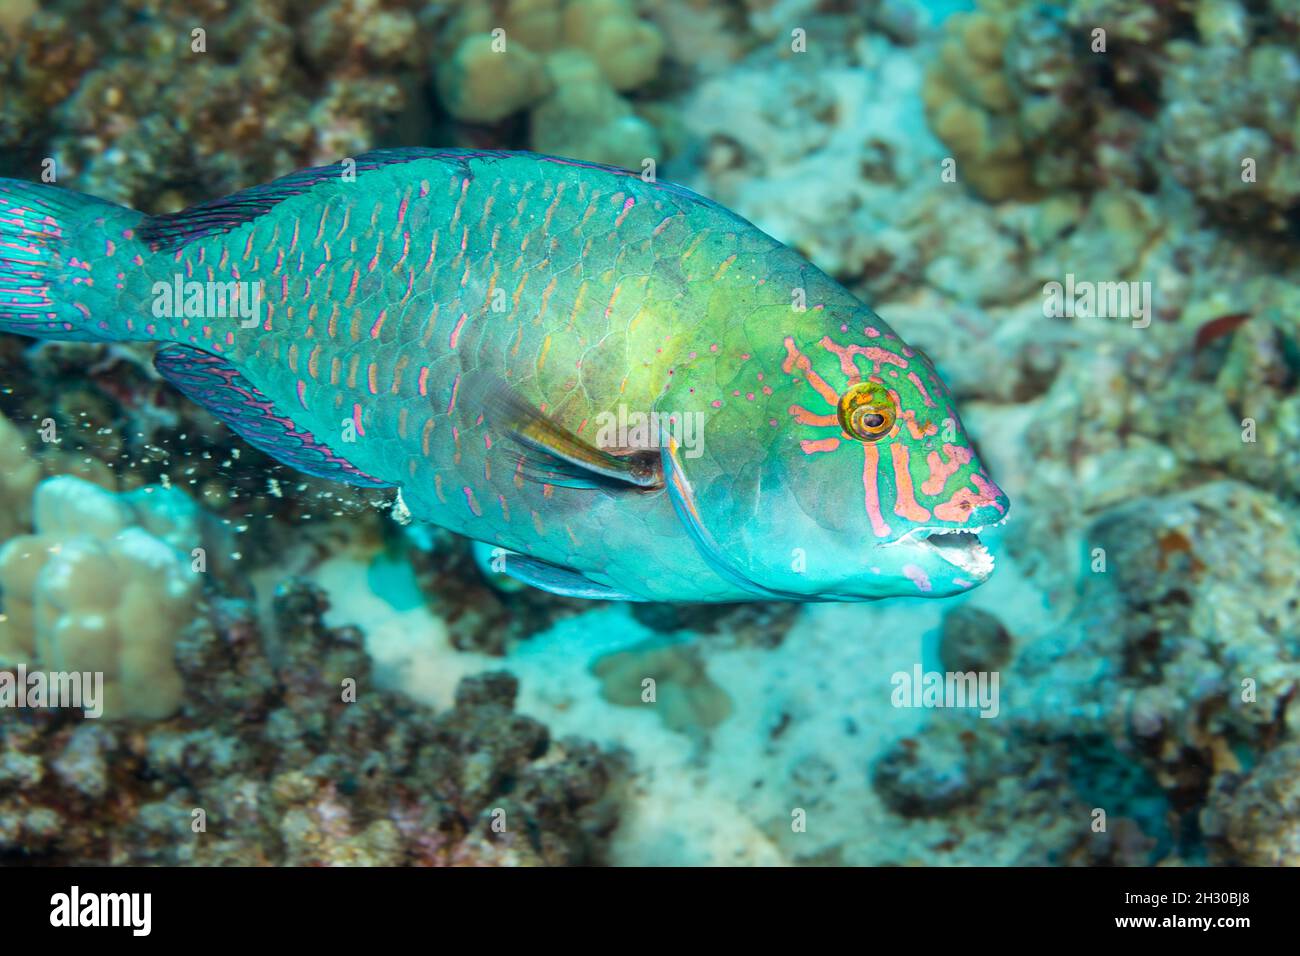 This terminal male stareye parrotfish, Calotomus carolinus, has been eating coral and is pictured dropping sand excrement on the reef, Hawaii. Stock Photo